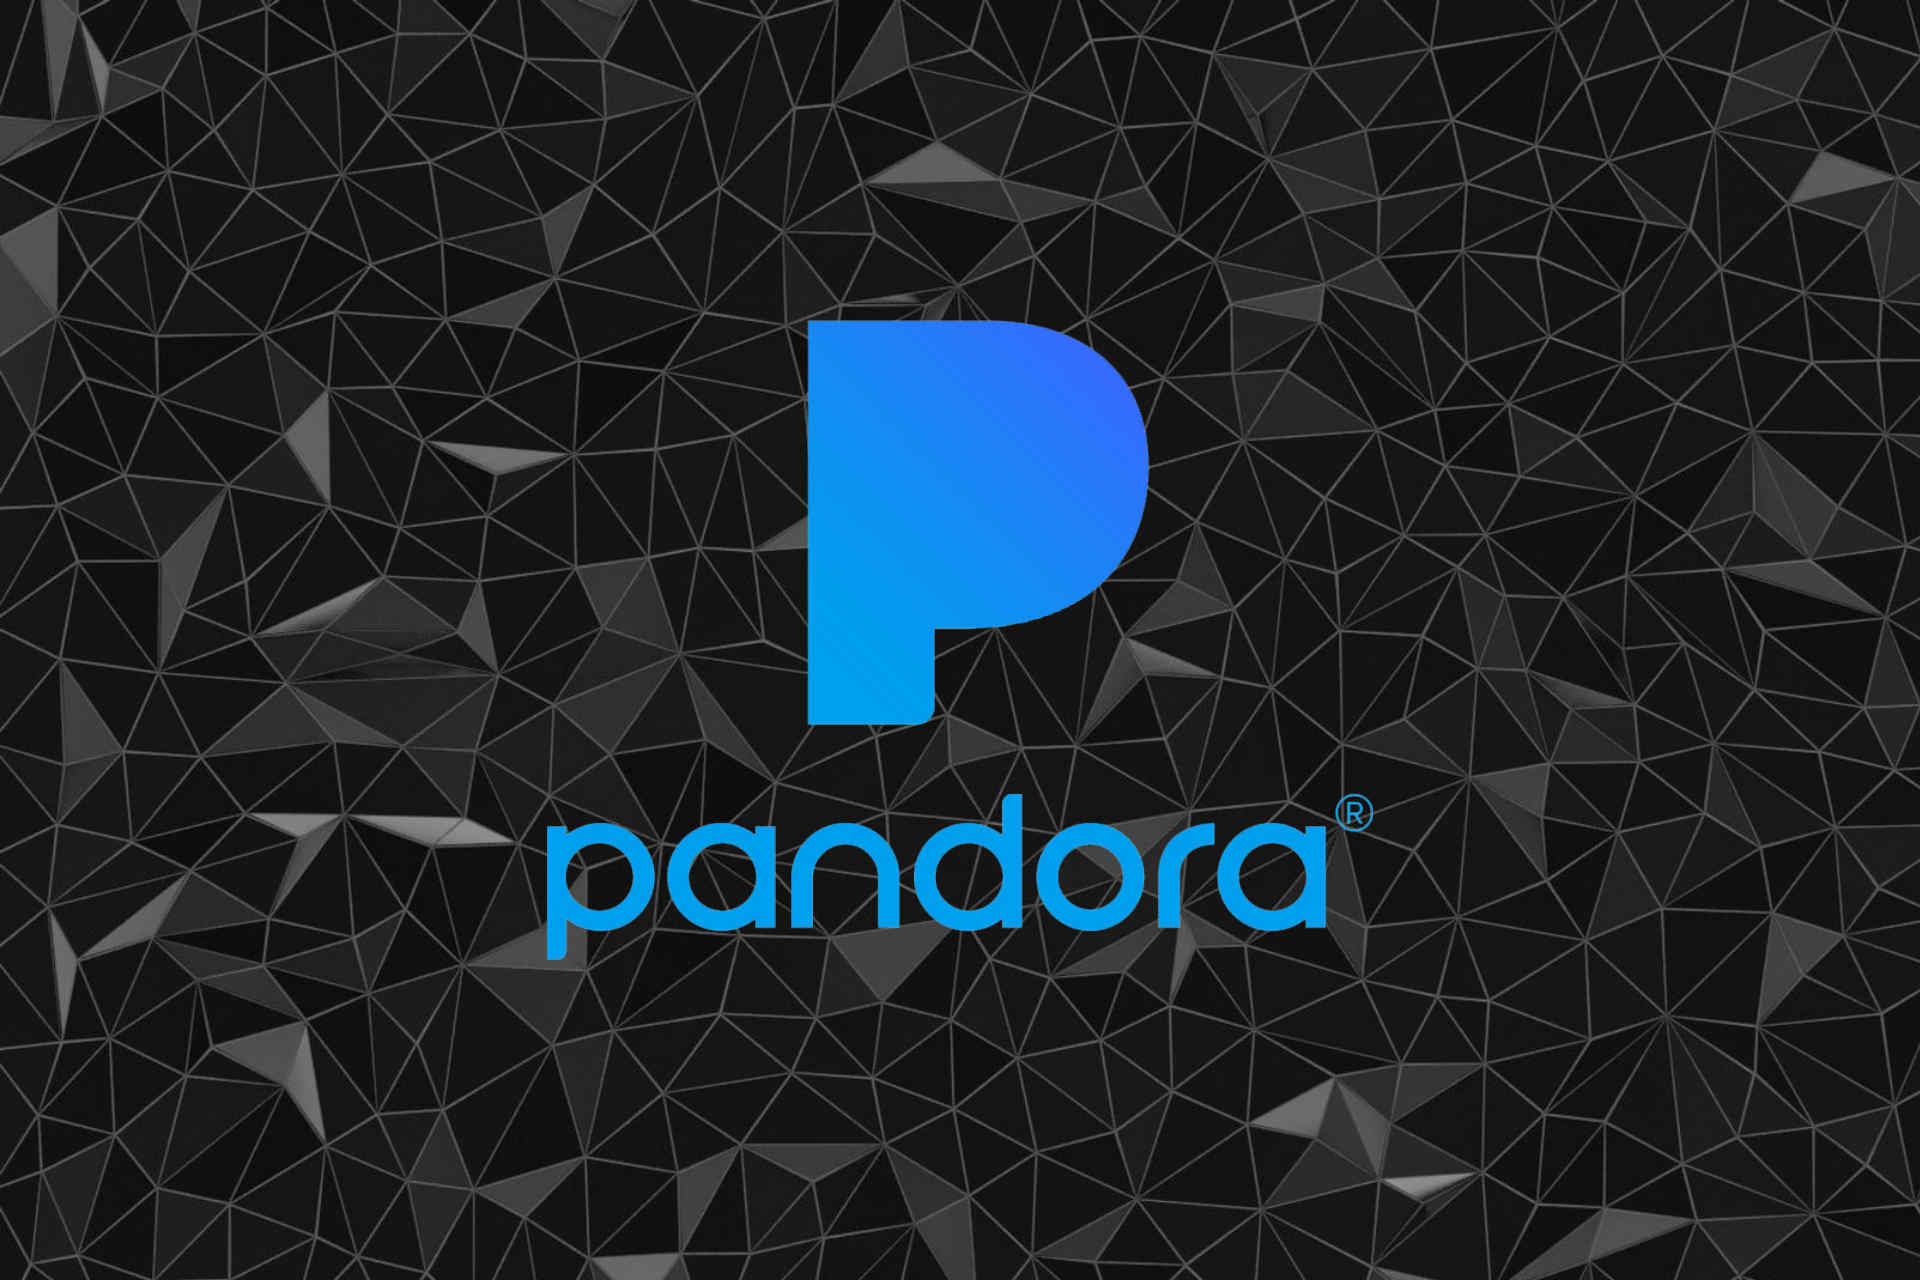 unable to download pandora windows 10 apps from microsoft store